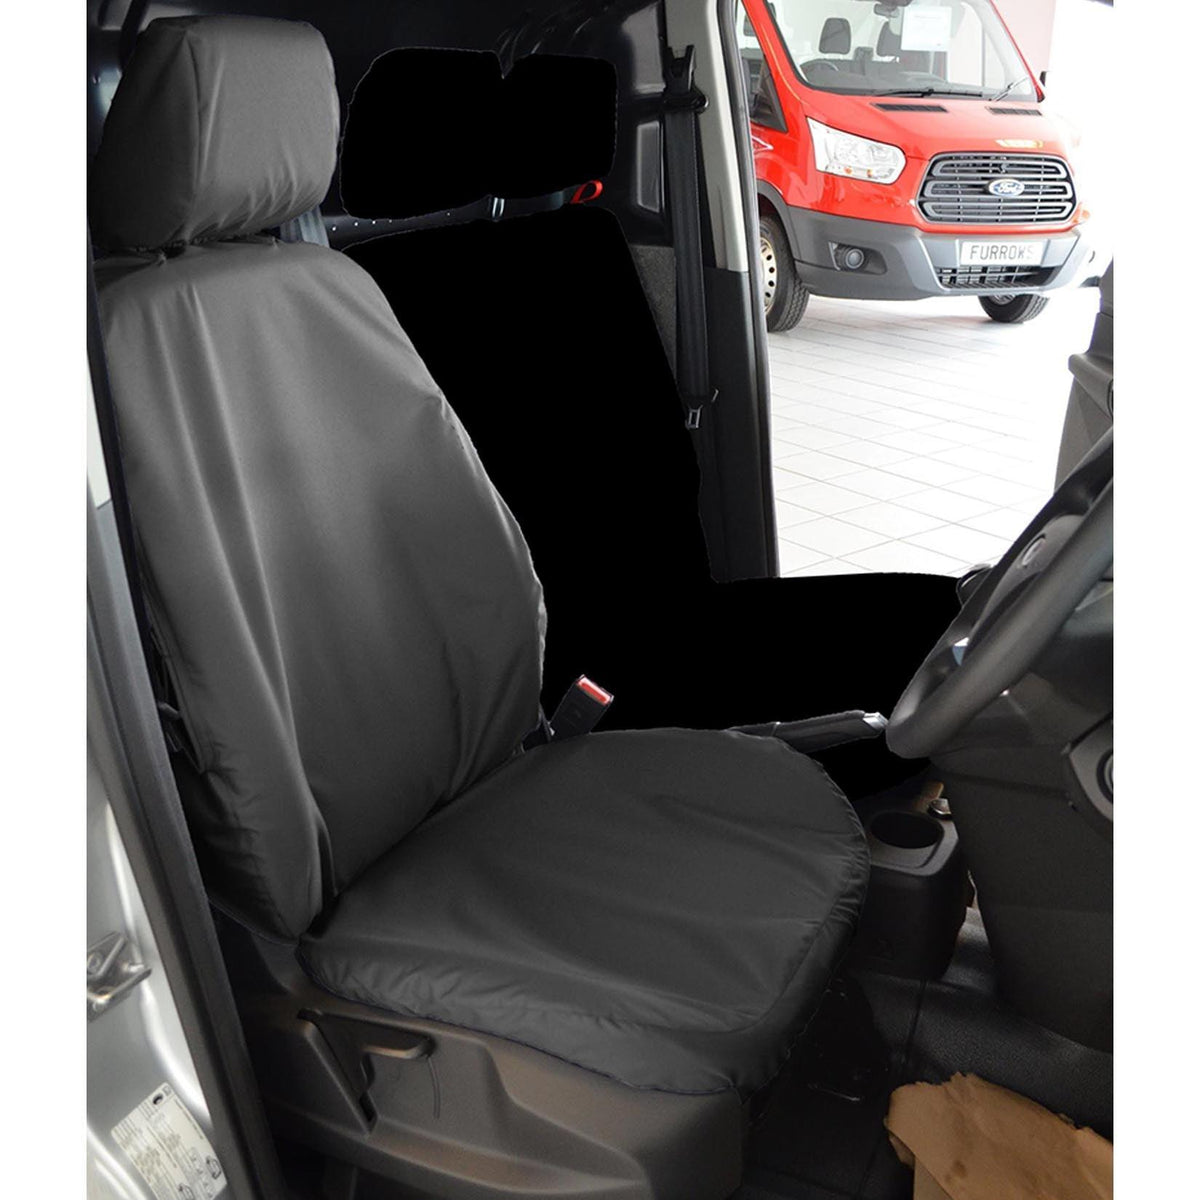 FORD TRANSIT CONNECT VAN 2014-2018 DRIVER'S SEAT COVER - BLACK - Storm Xccessories2